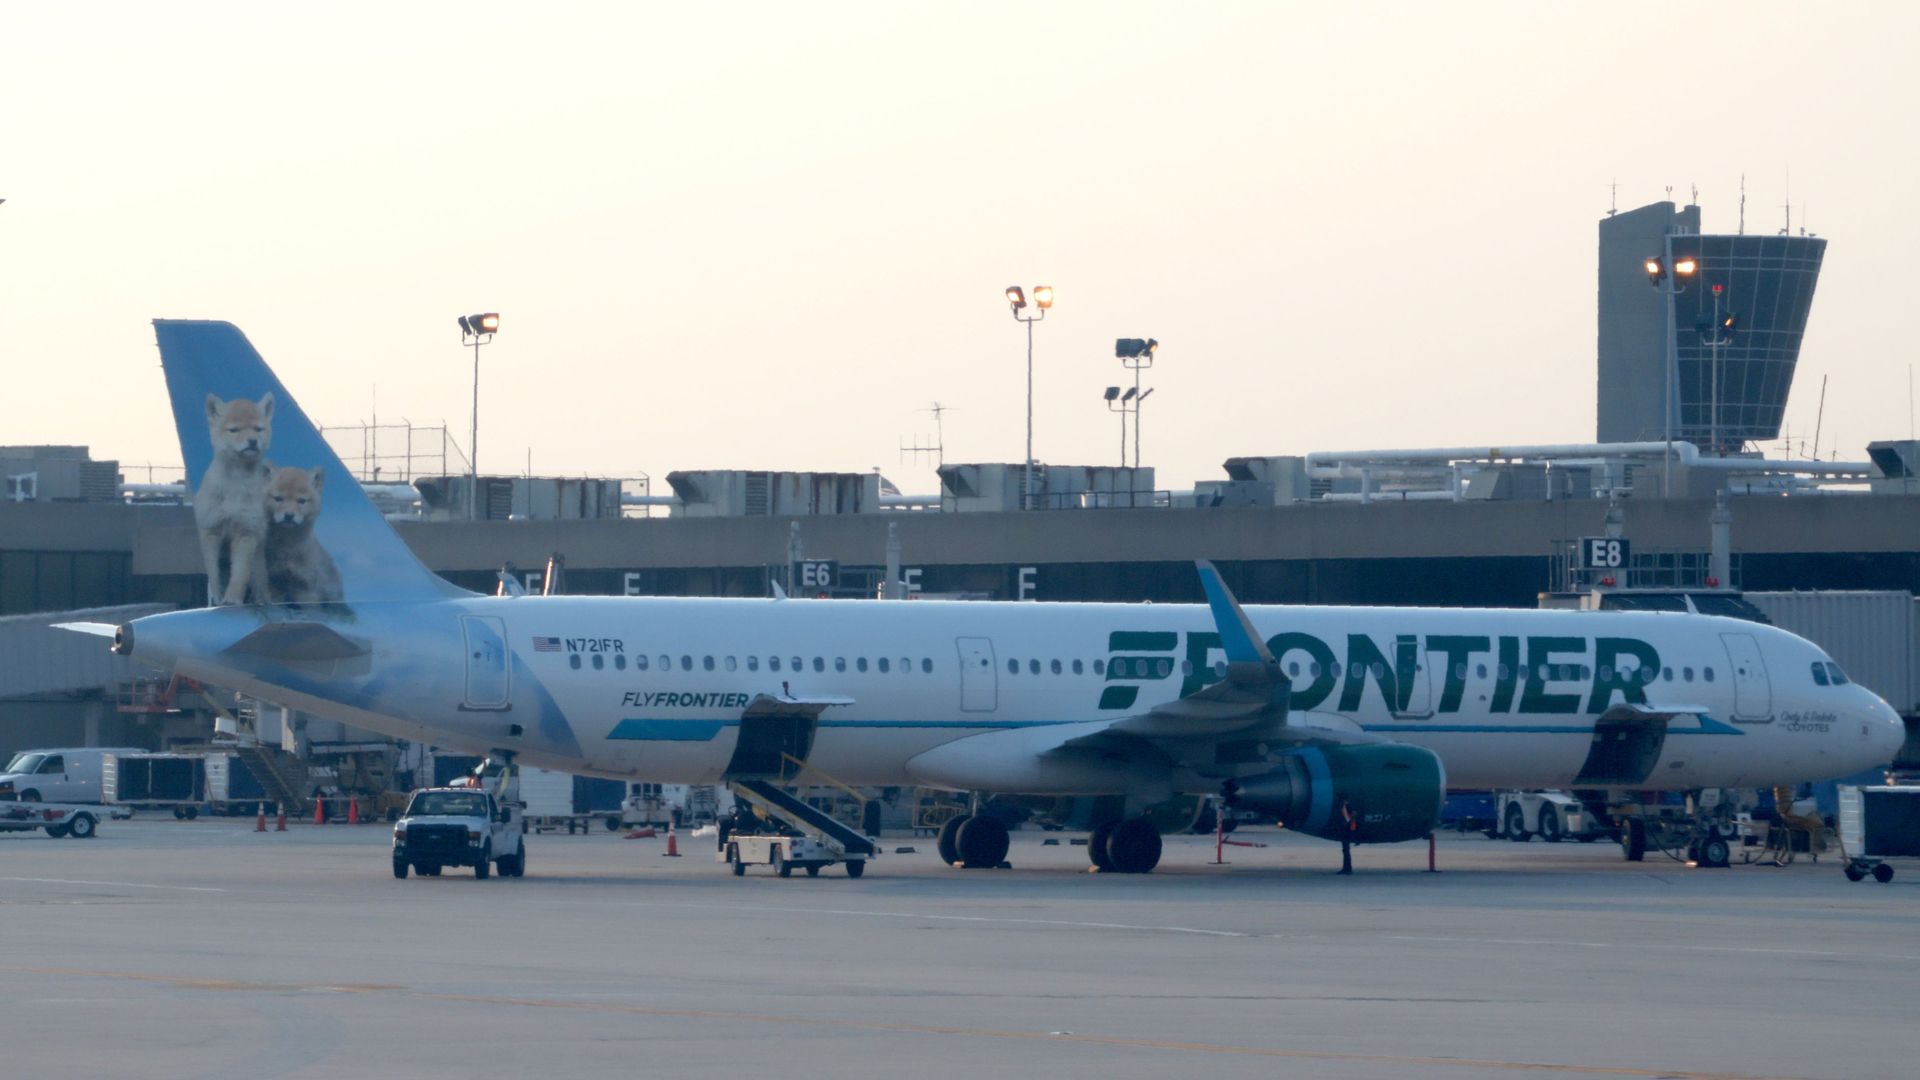 A Frontier Airlines jet at Philadelphia International Airport 